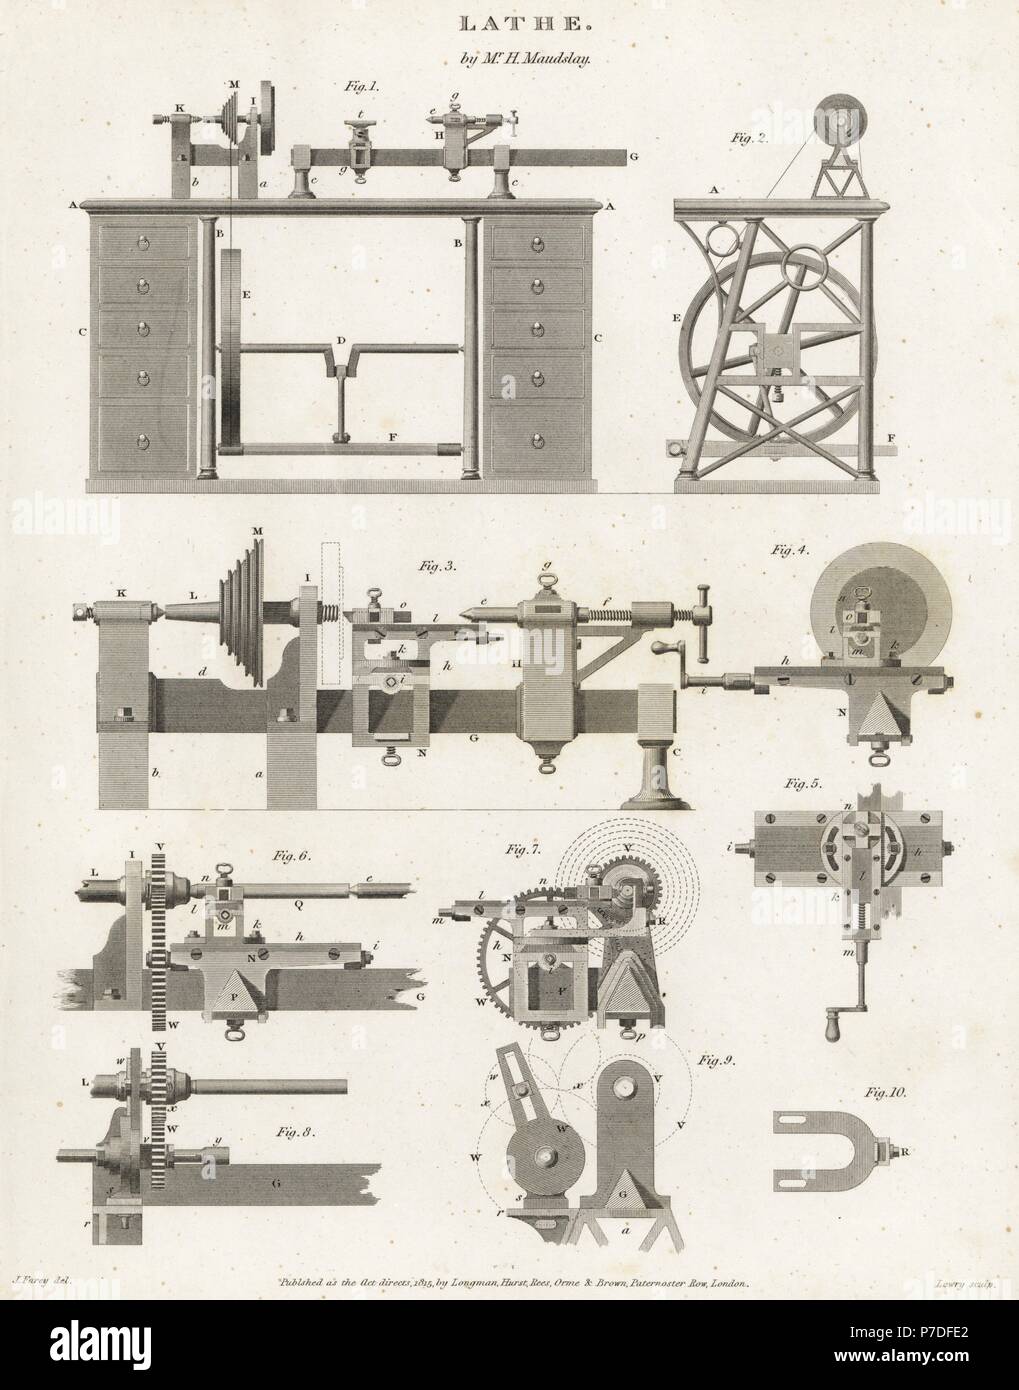 Henry Maudslay's revolutionary screw-cutting lathe, 1800. Copperplate engraving by Wilson Lowry after a drawing by J. Farey from Abraham Rees' Cyclopedia or Universal Dictionary of Arts, Sciences and Literature, Longman, Hurst, Rees, Orme and Brown, London, 1815. Stock Photo